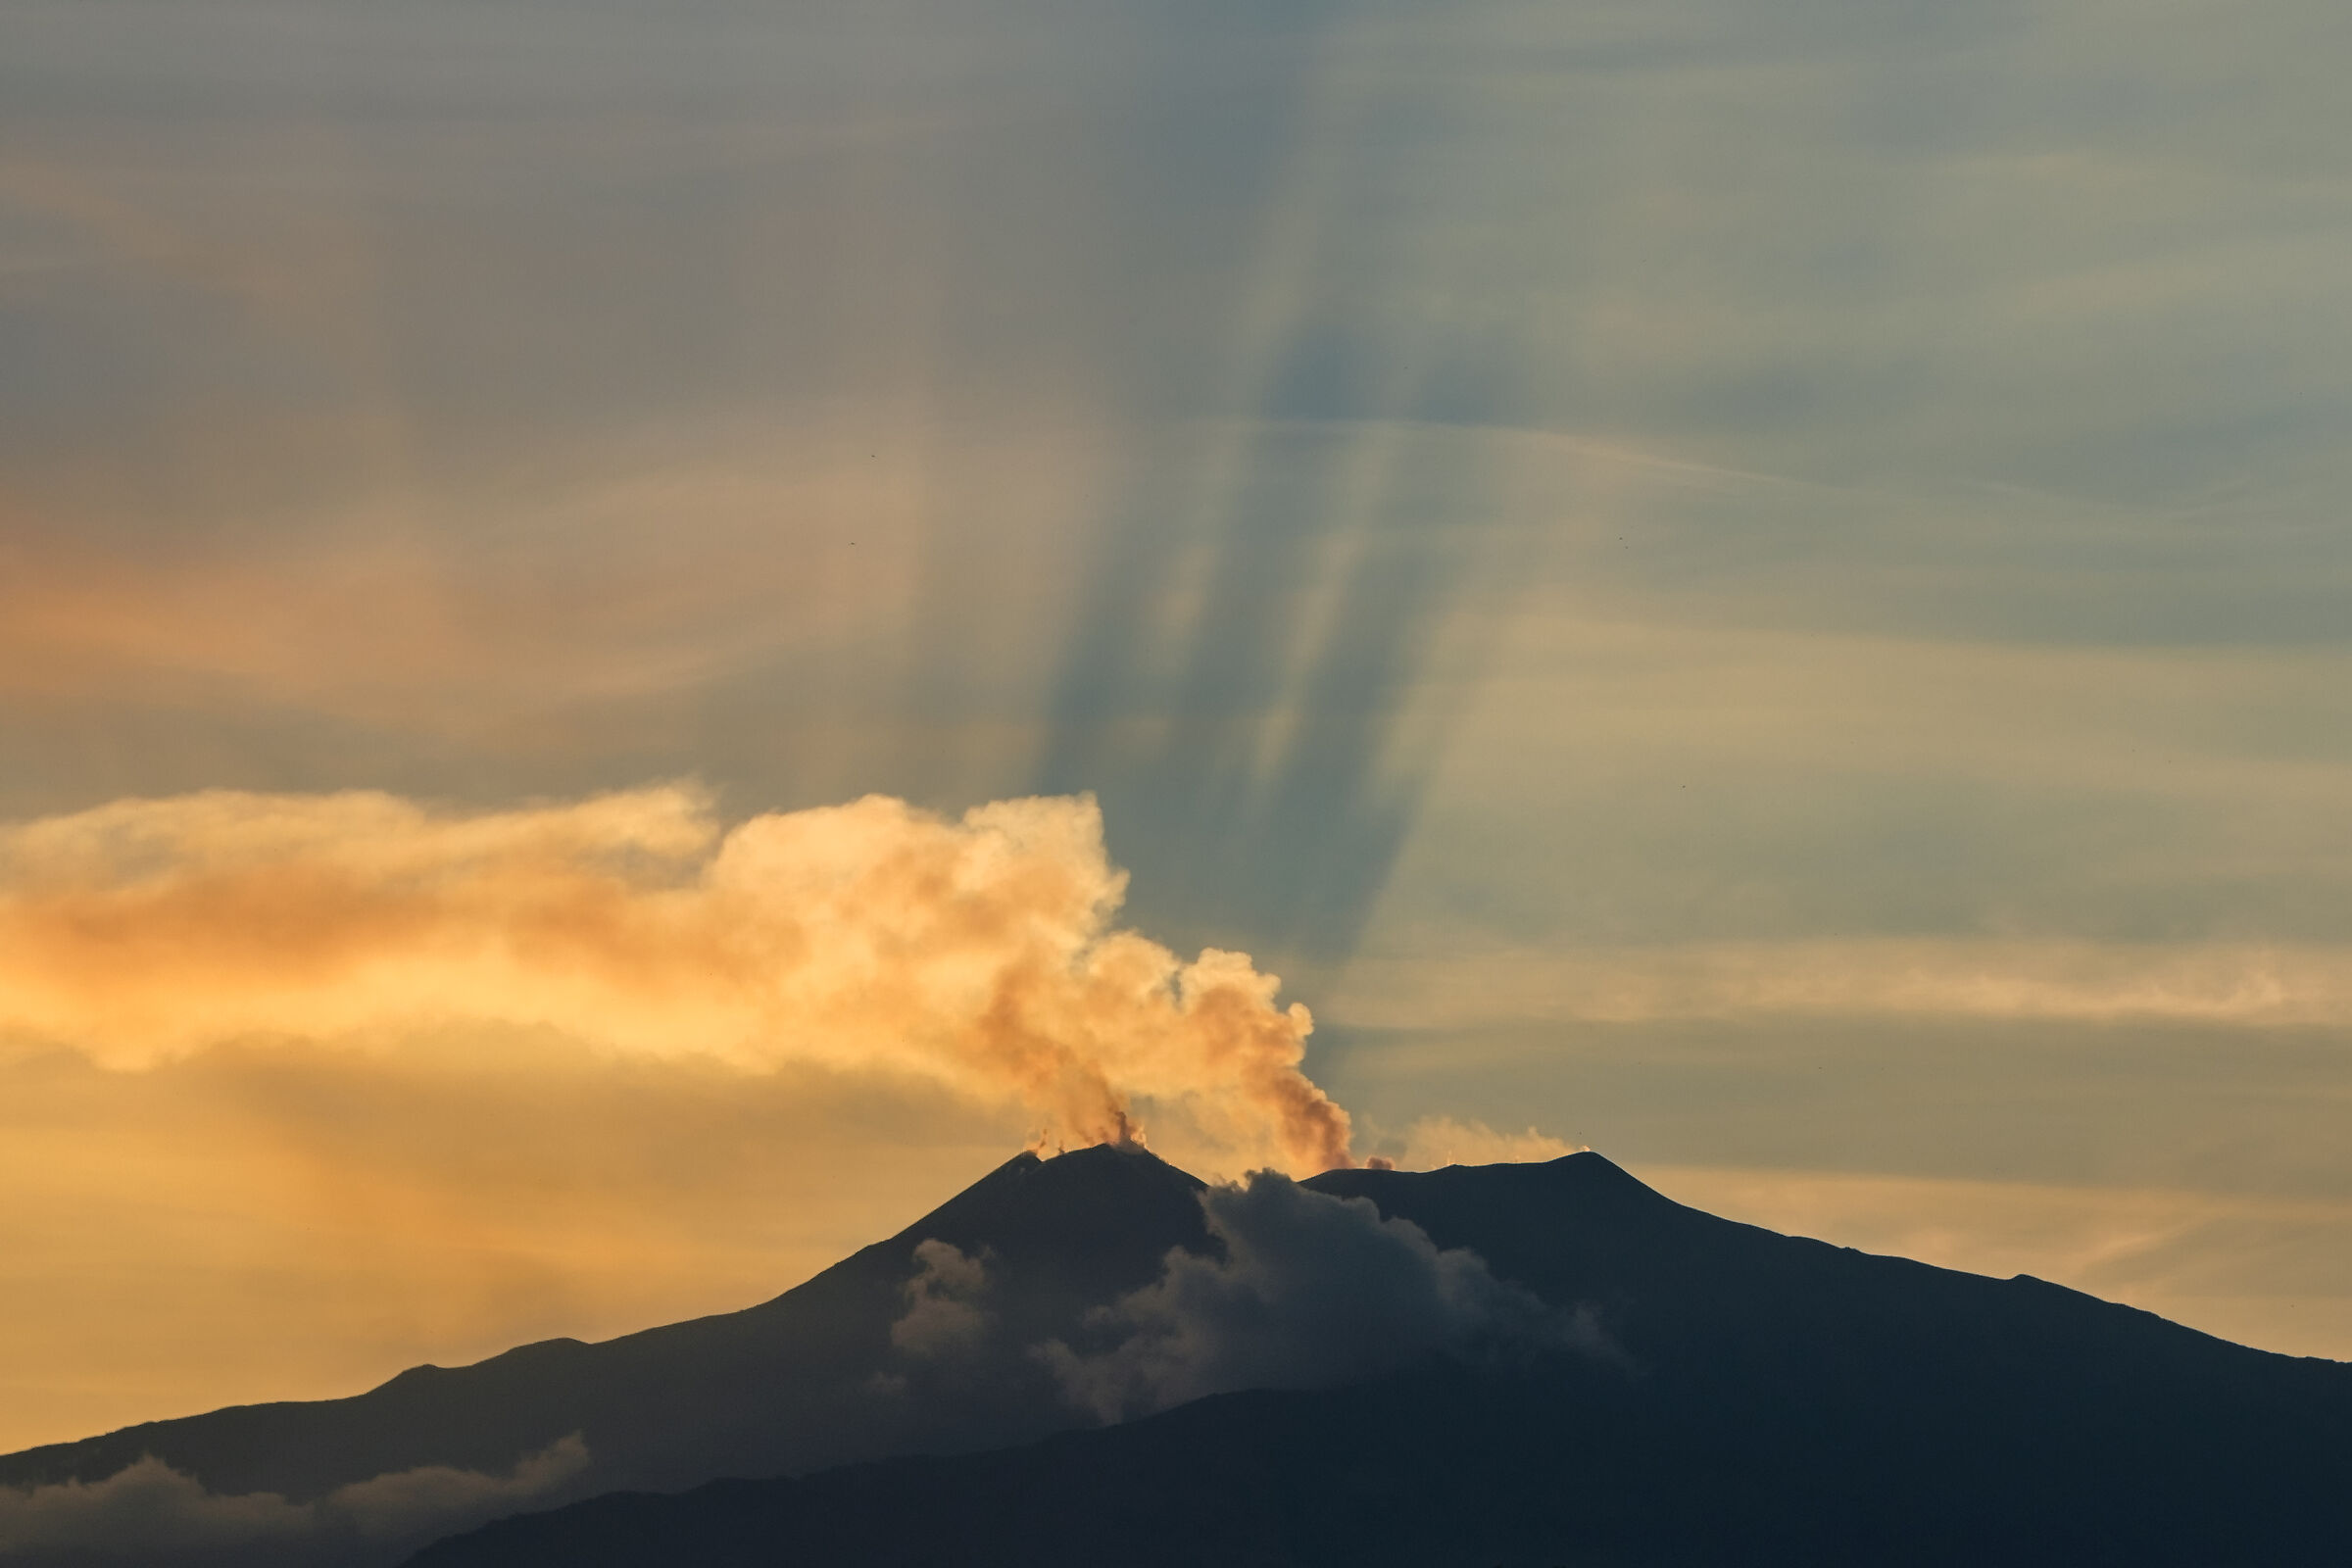 The claws of Etna...